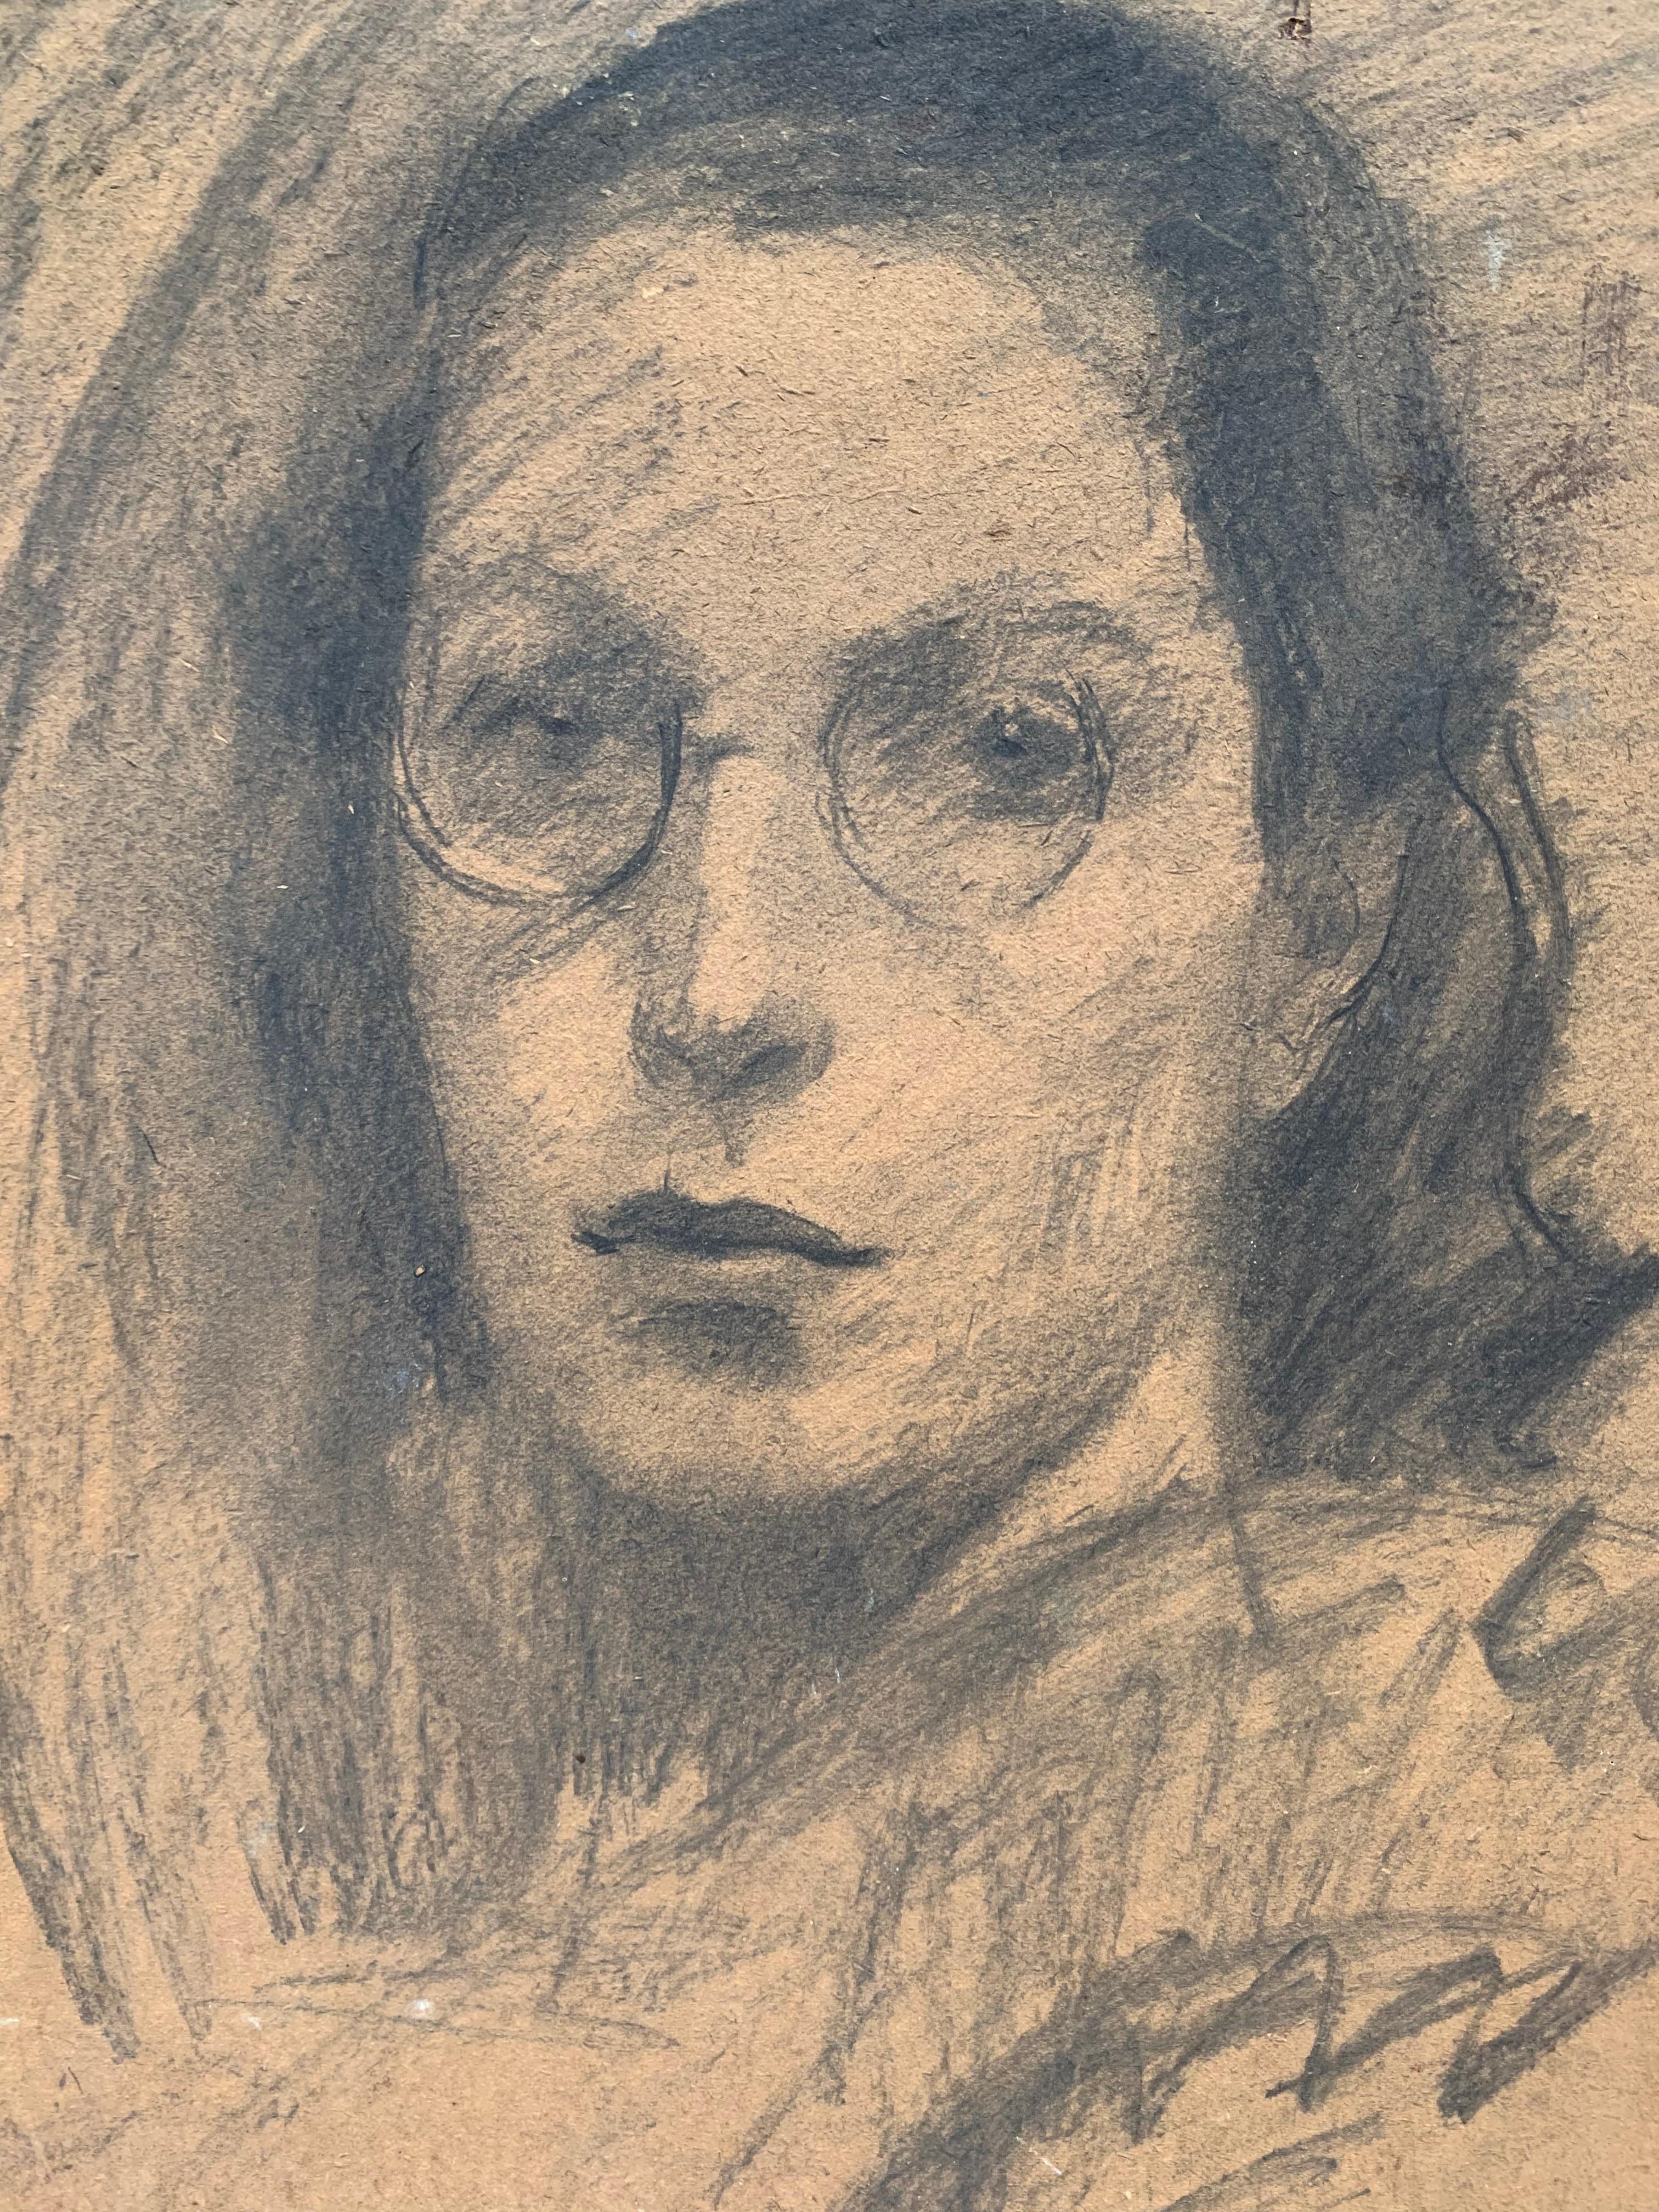 Girl with glasses. About 1920-30. Double portrait. Spalmach Gino
(Rome, 1900 - 1966). Painted on two sides: on one side the young woman with glasses is represented, in charcoal/pencil monochrome; on the other side - a lively and whimsical oil